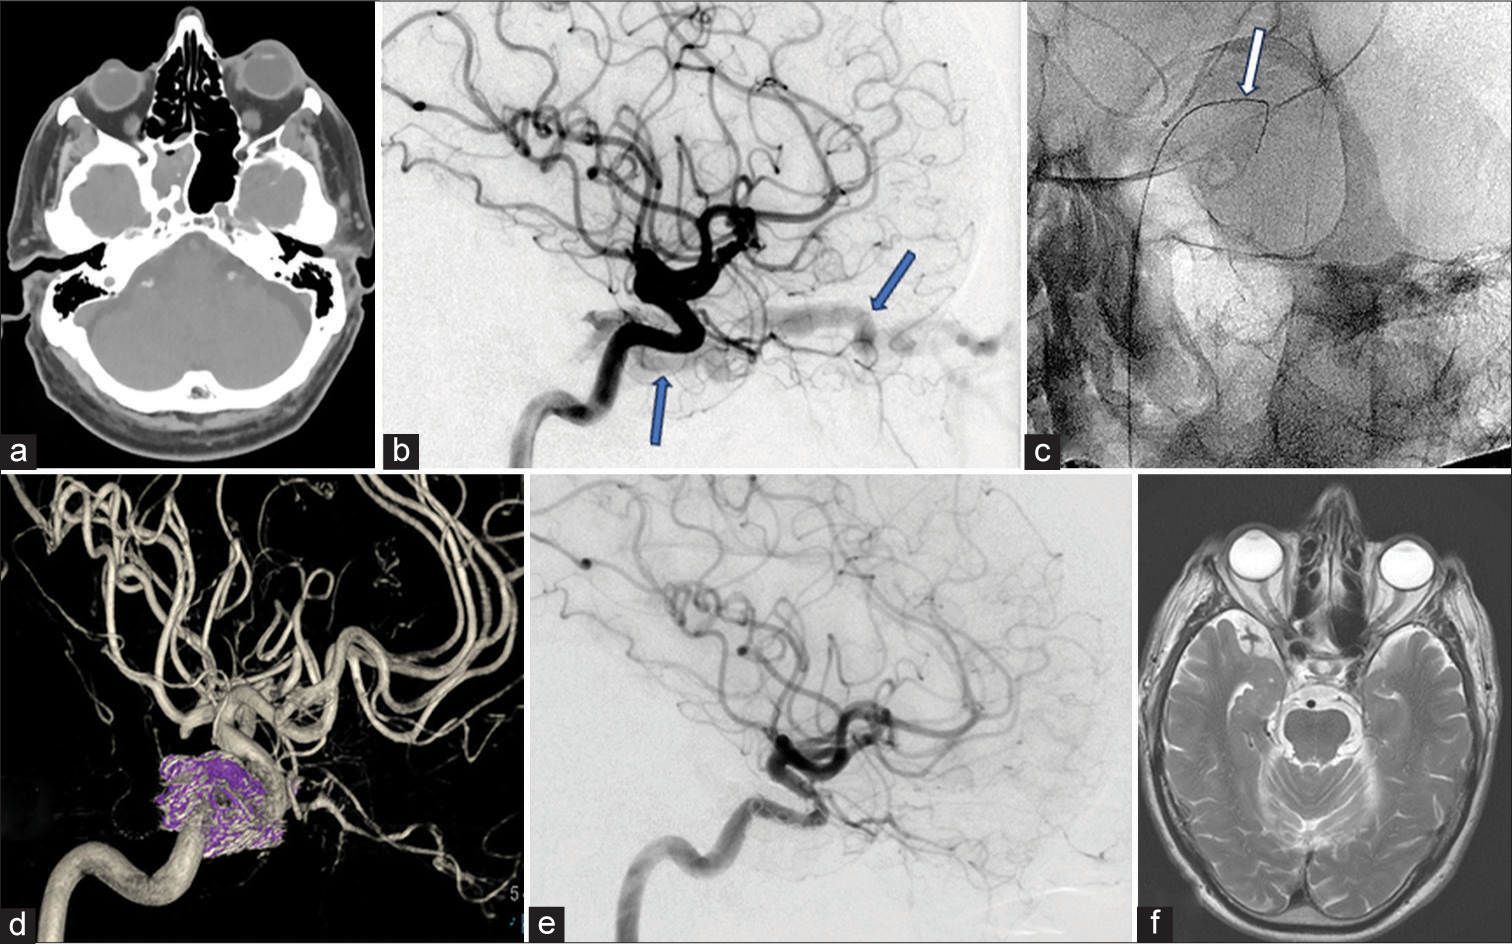 Caroticocavernous fistula (CCF) pre- and post-endovascular treatment. (a) Computed tomography of the head showing left-sided proptosis. (b) Left internal carotid angiogram (lateral view) showing early filling of contrast in the left cavernous sinus and a dilated left superior ophthalmic vein (SOV), both indicated by blue arrows, in keeping with an underlying fistula. (c) Wire (white arrow) in the left SOV introduced externally to access the cavernous sinus. Access to the sinus through the internal jugular vein/inferior petrosal sinus was not possible in this case. Cannulation of SOV was performed by an ophthalmic surgeon by skin crease incision and open cut down. (d) Post-treatment left internal carotid angiogram (3-D spin reformat) showing occlusion of CCF with coils (in purple) in the cavernous sinus. (e) Left internal carotid artery angiogram (lateral view) post-treatment. The early filling of the cavernous sinus and SOV present previously (cf. B) is no longer seen, indicating occlusion of the fistula. (f) Magnetic resonance imaging of the head after about six months shows complete resolution of the left proptosis.